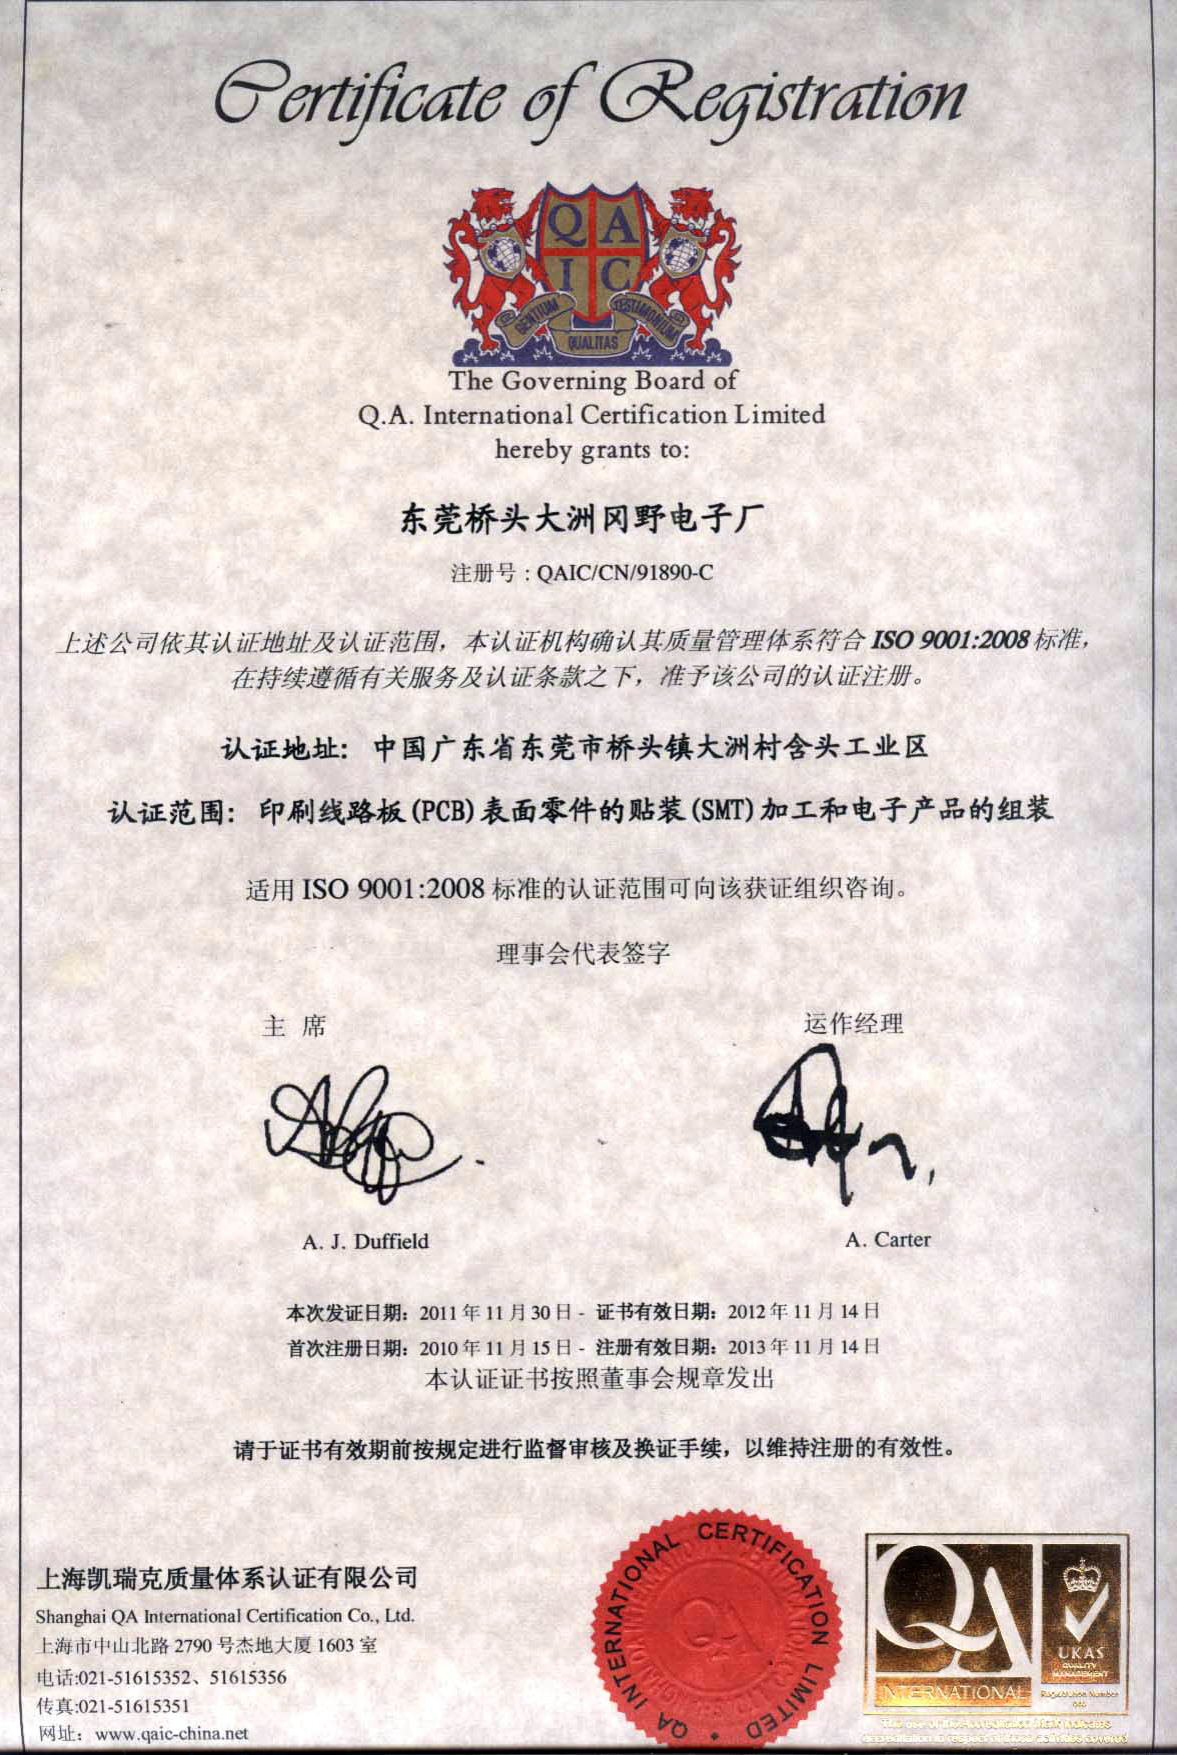 This is certificate of ISO9001 Chinese language for OKTEK smt pcba first manufacturer